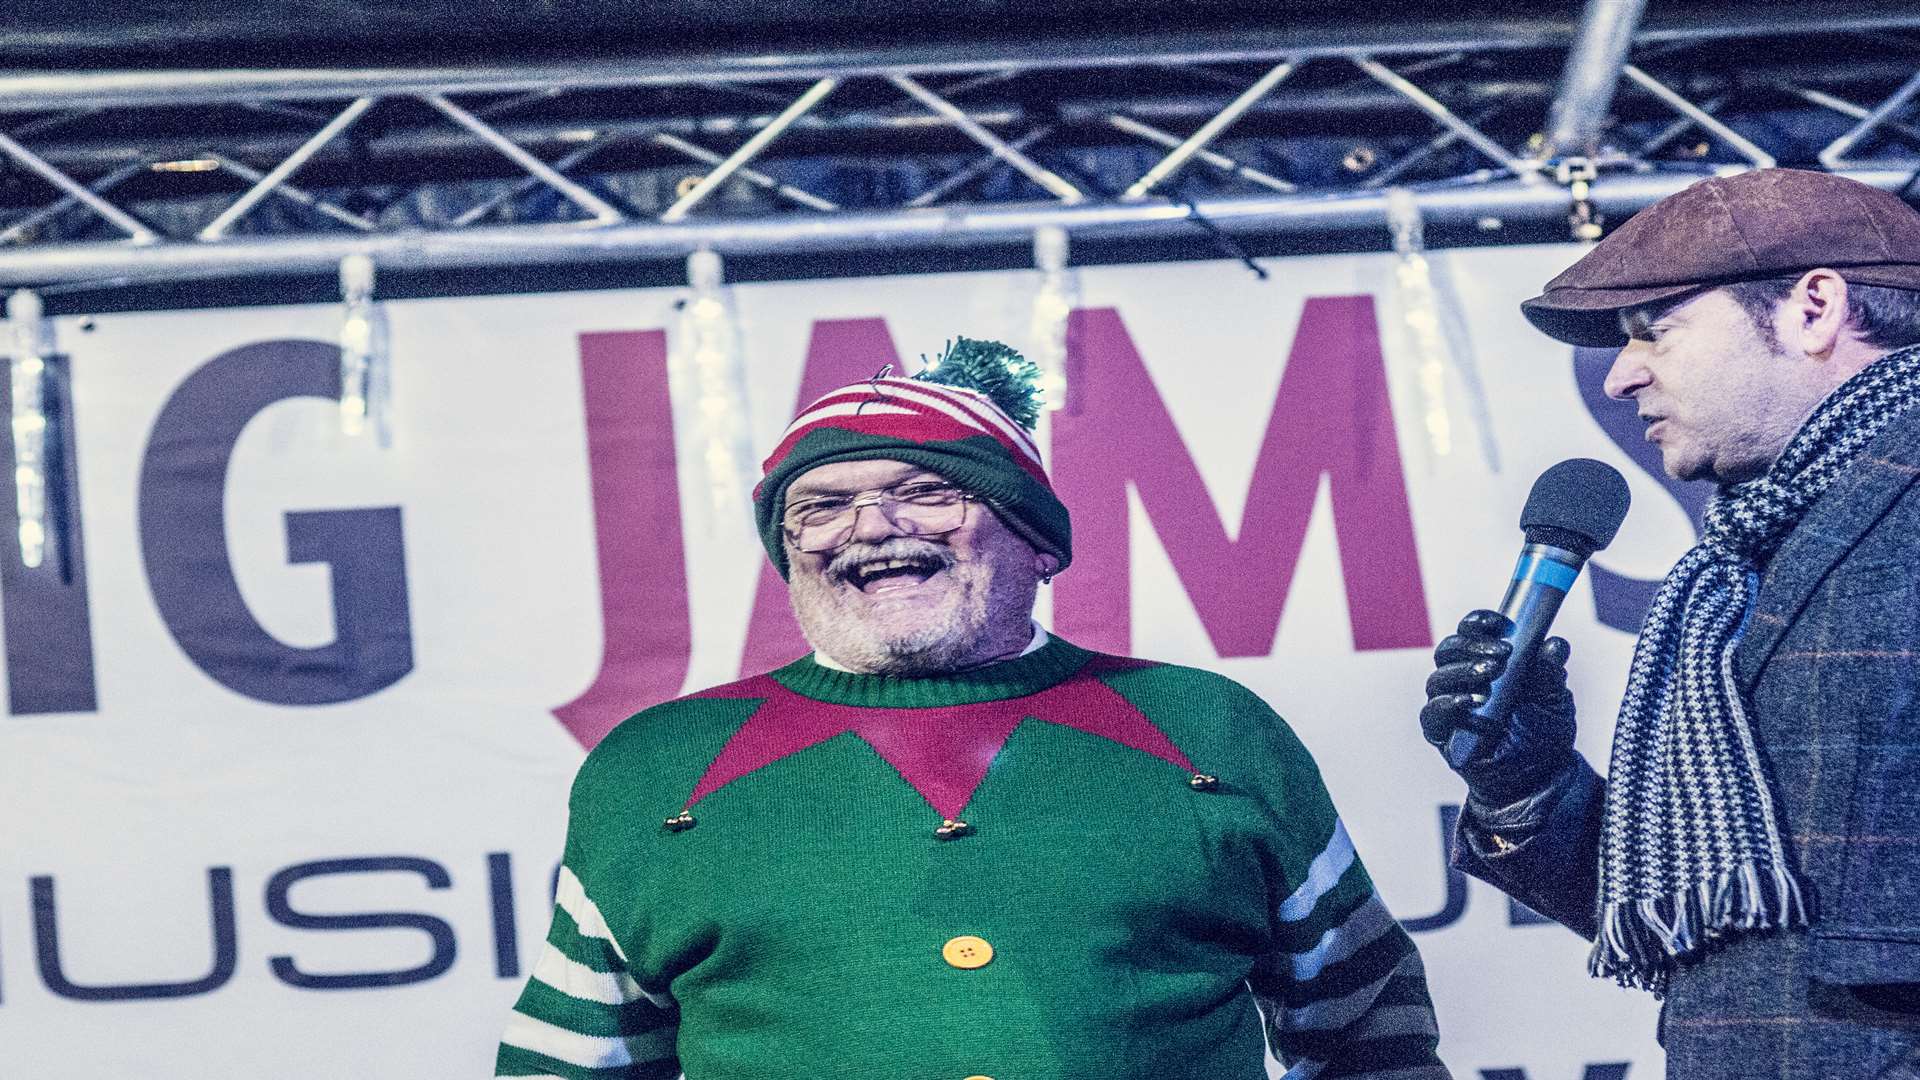 Hero Clive Mitson dressed as an elf to switch on West Malling's Christmas lights. Picture: The White Studios